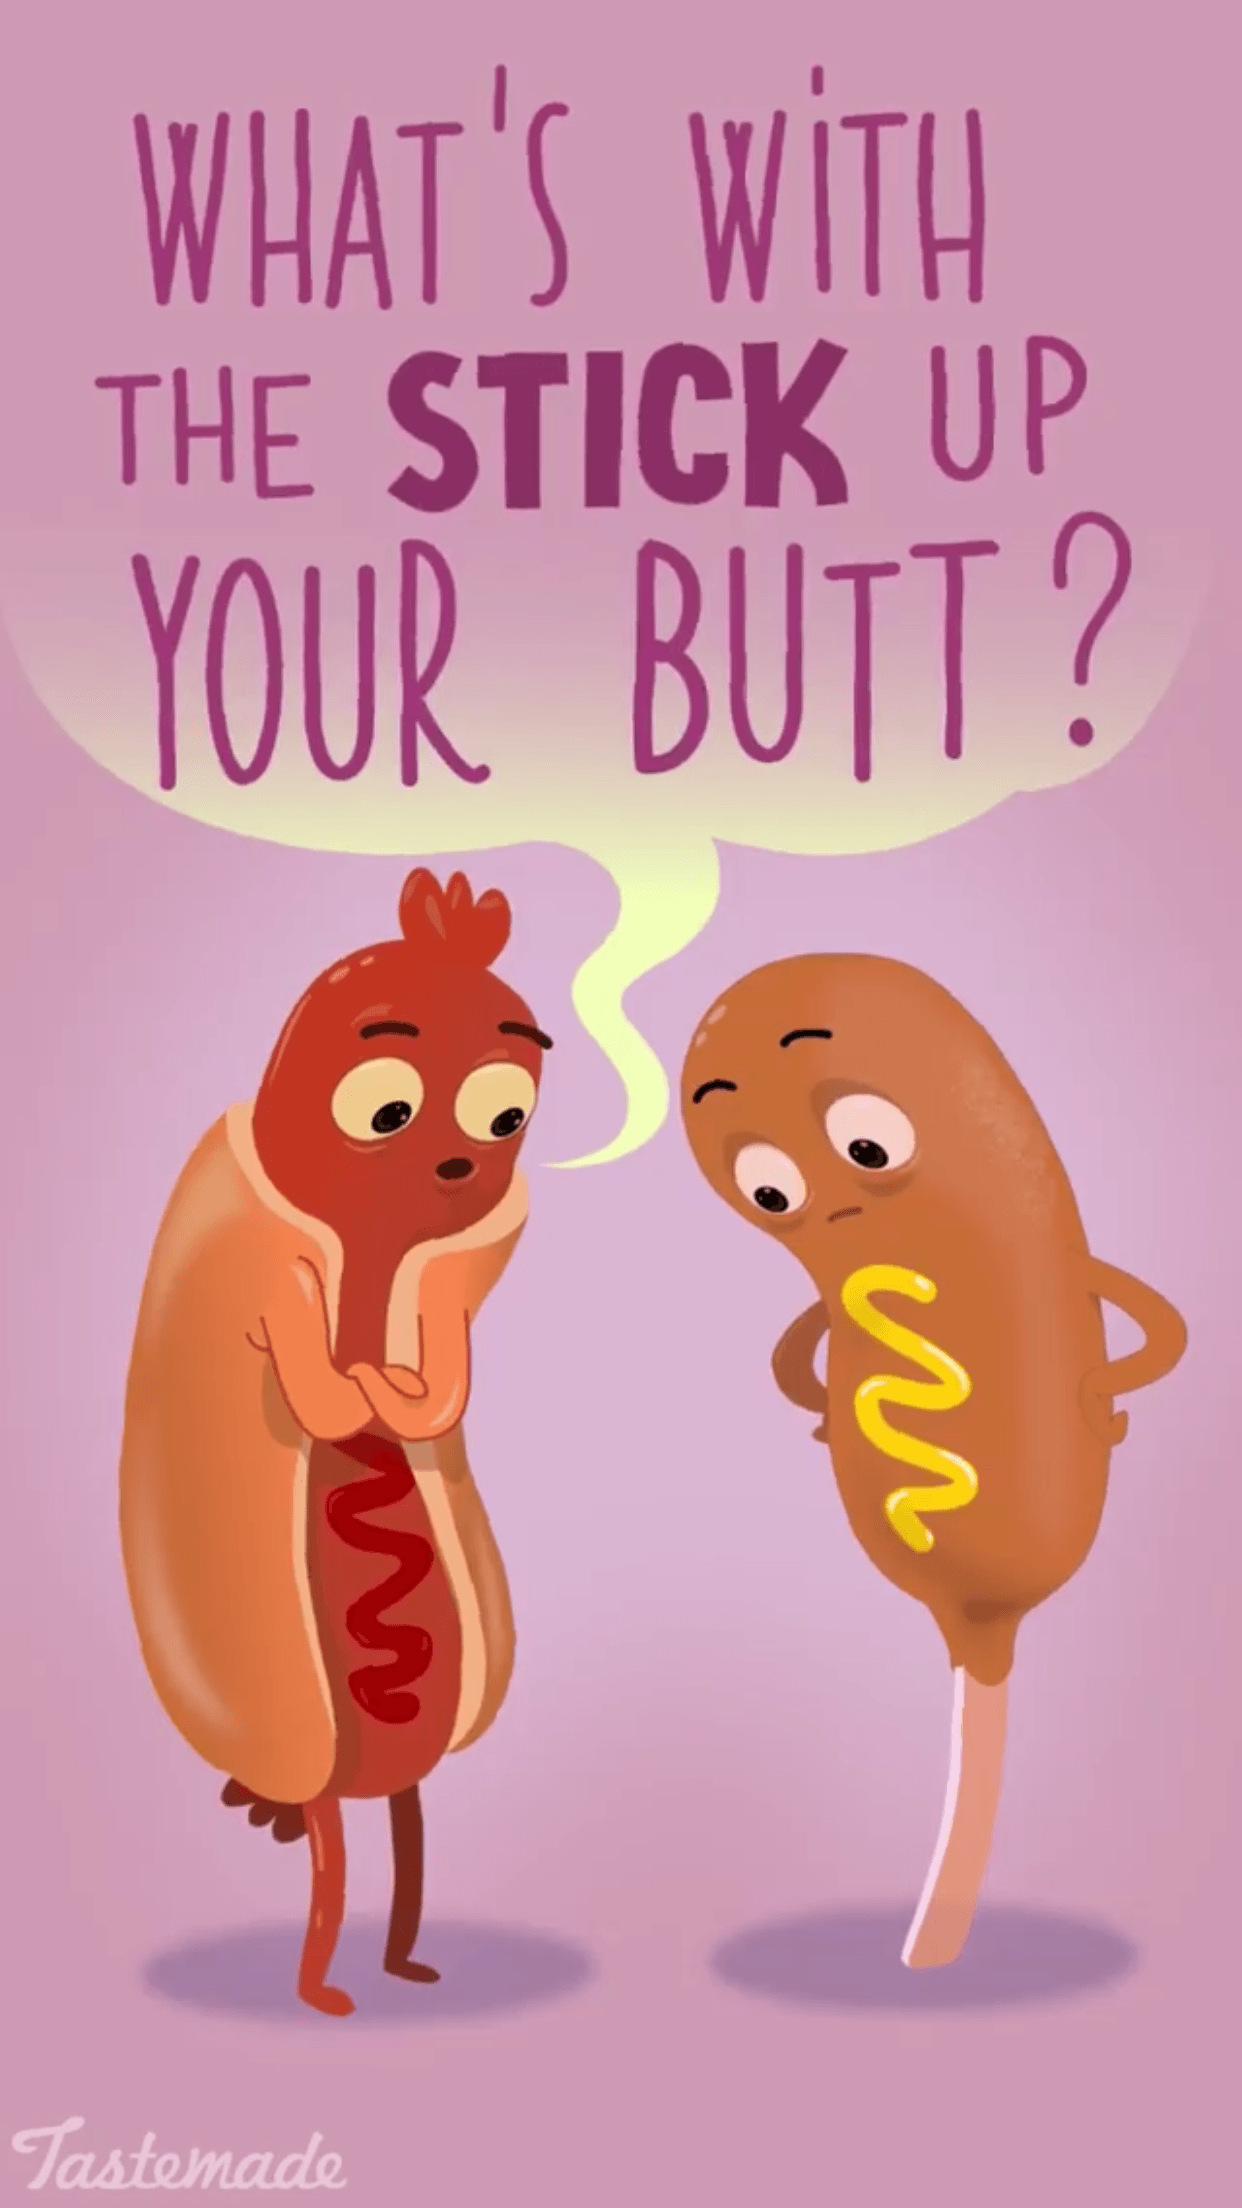 What's with the stick up your butt? Hot dog corn dog conversation